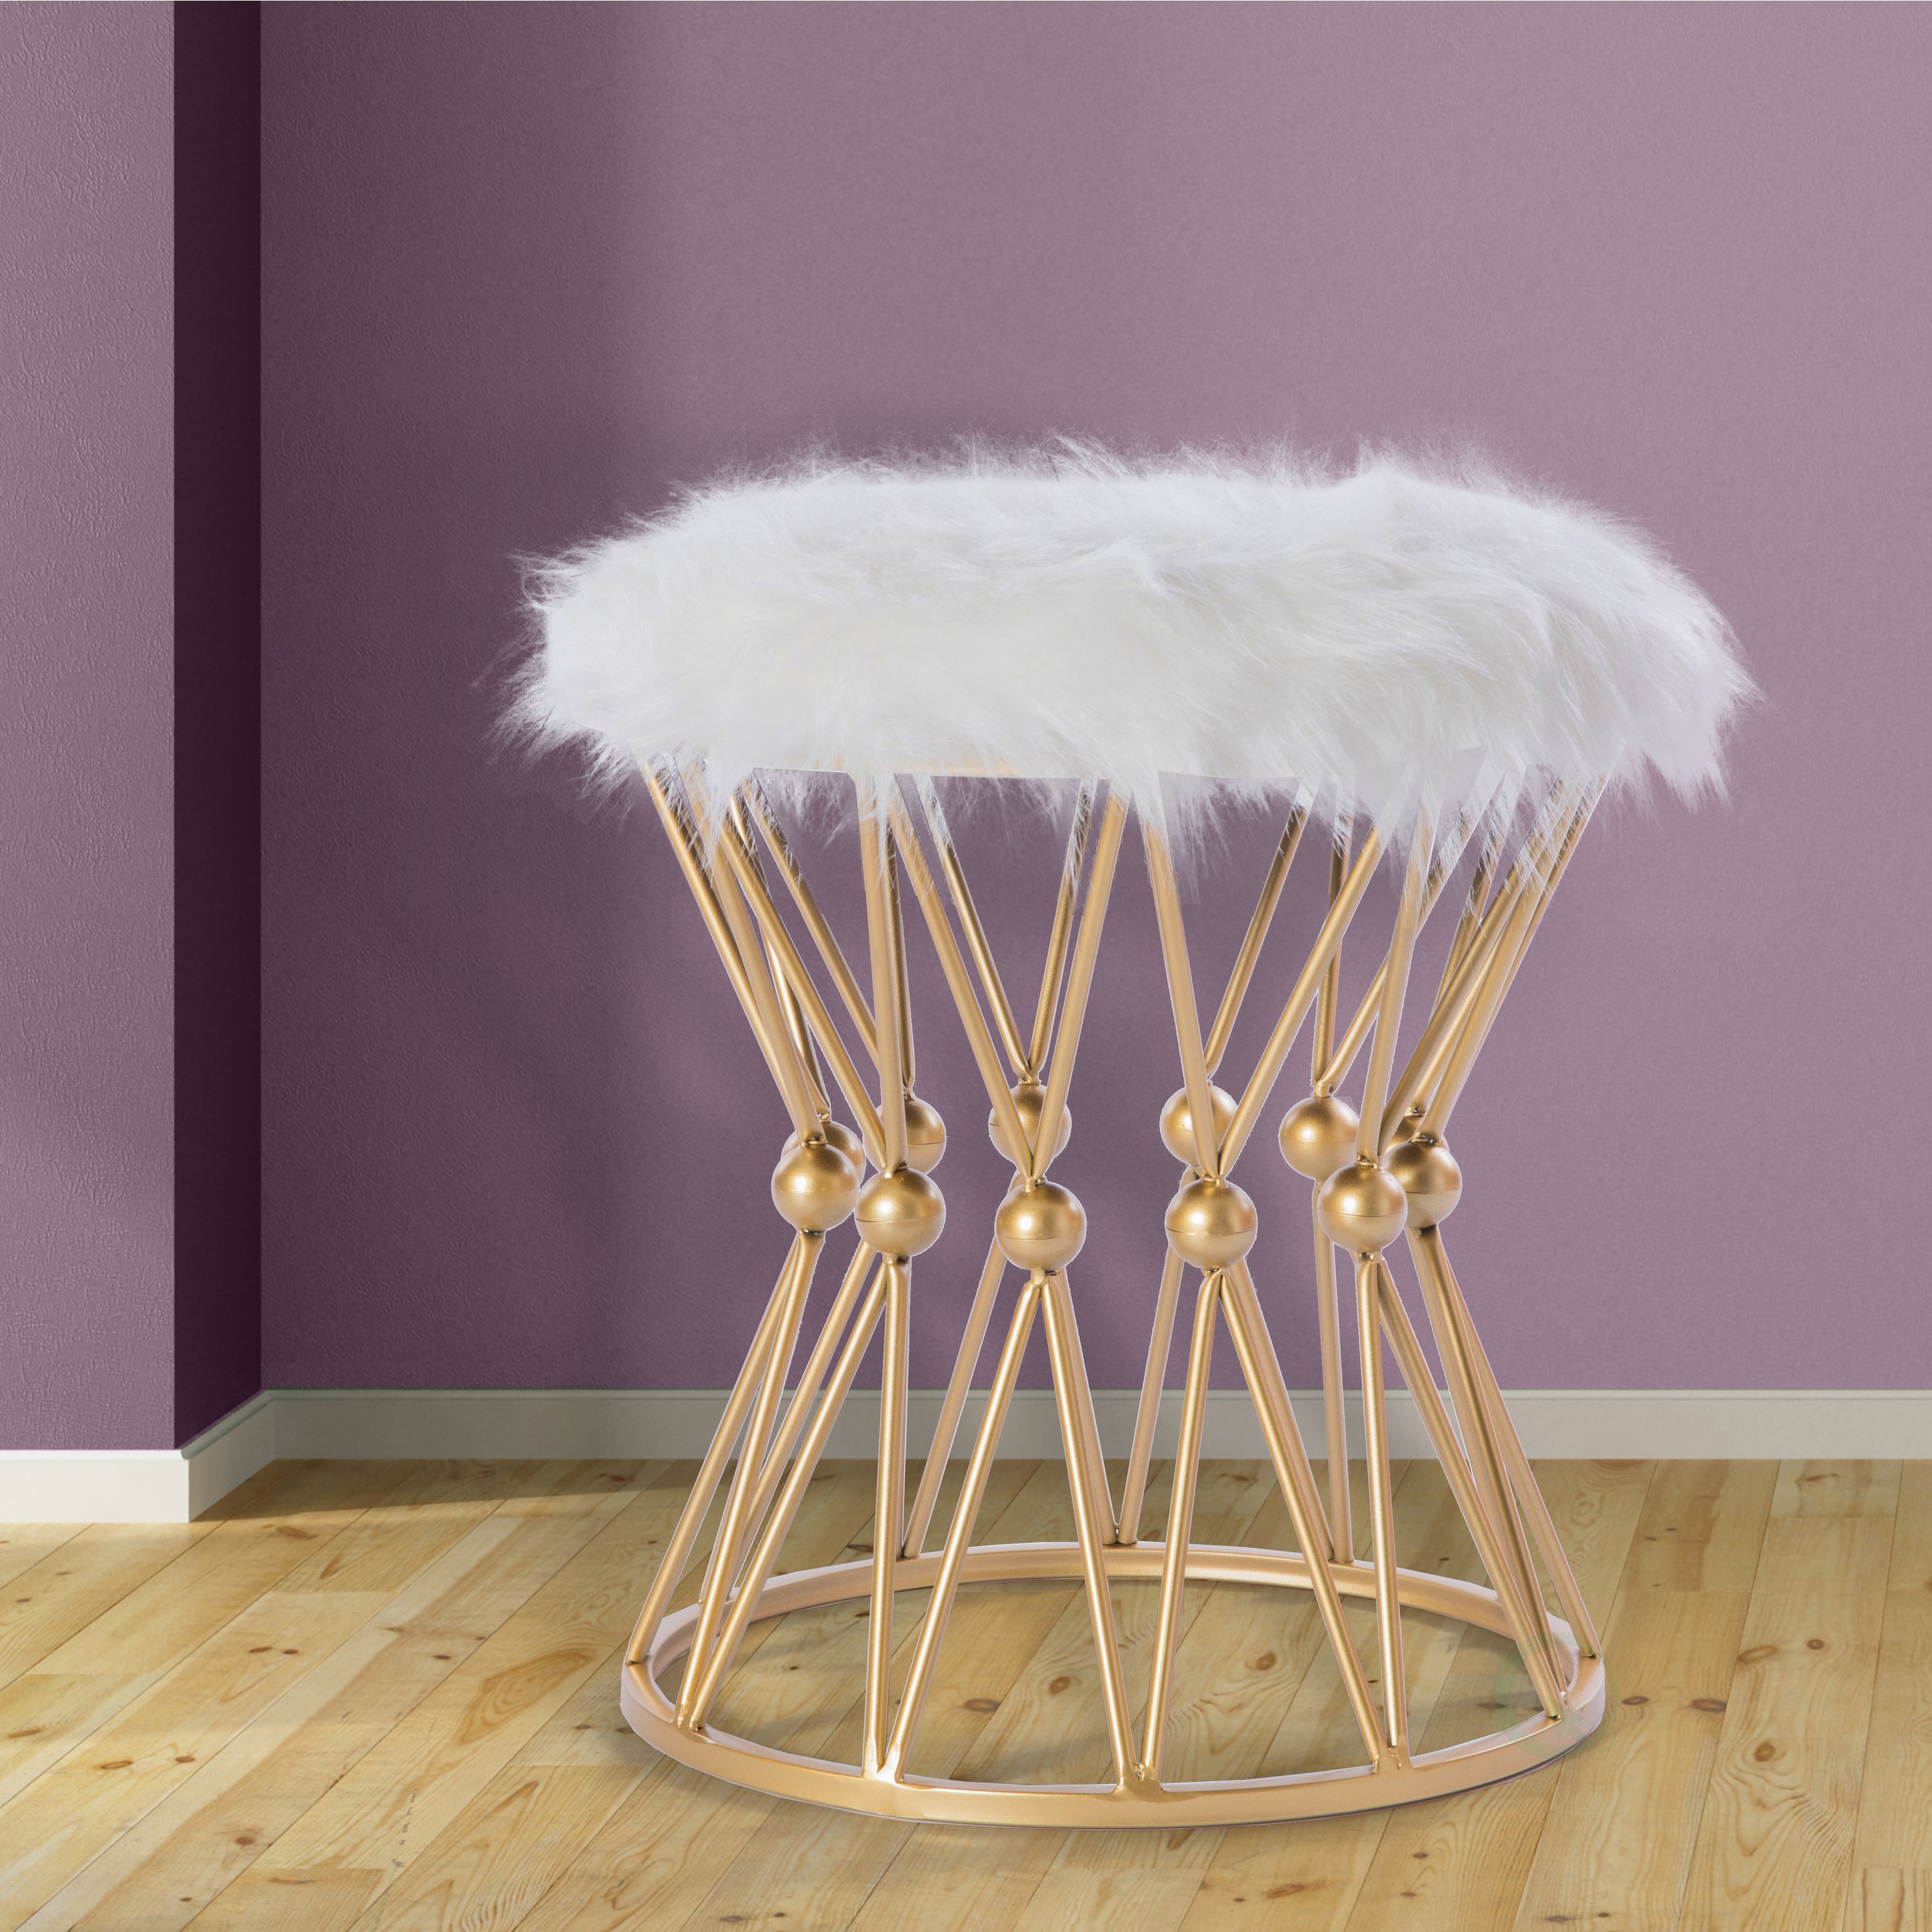 Round Gold Metal Accent Vanity Stool With White Fur Top Seat, Decorative Side Table